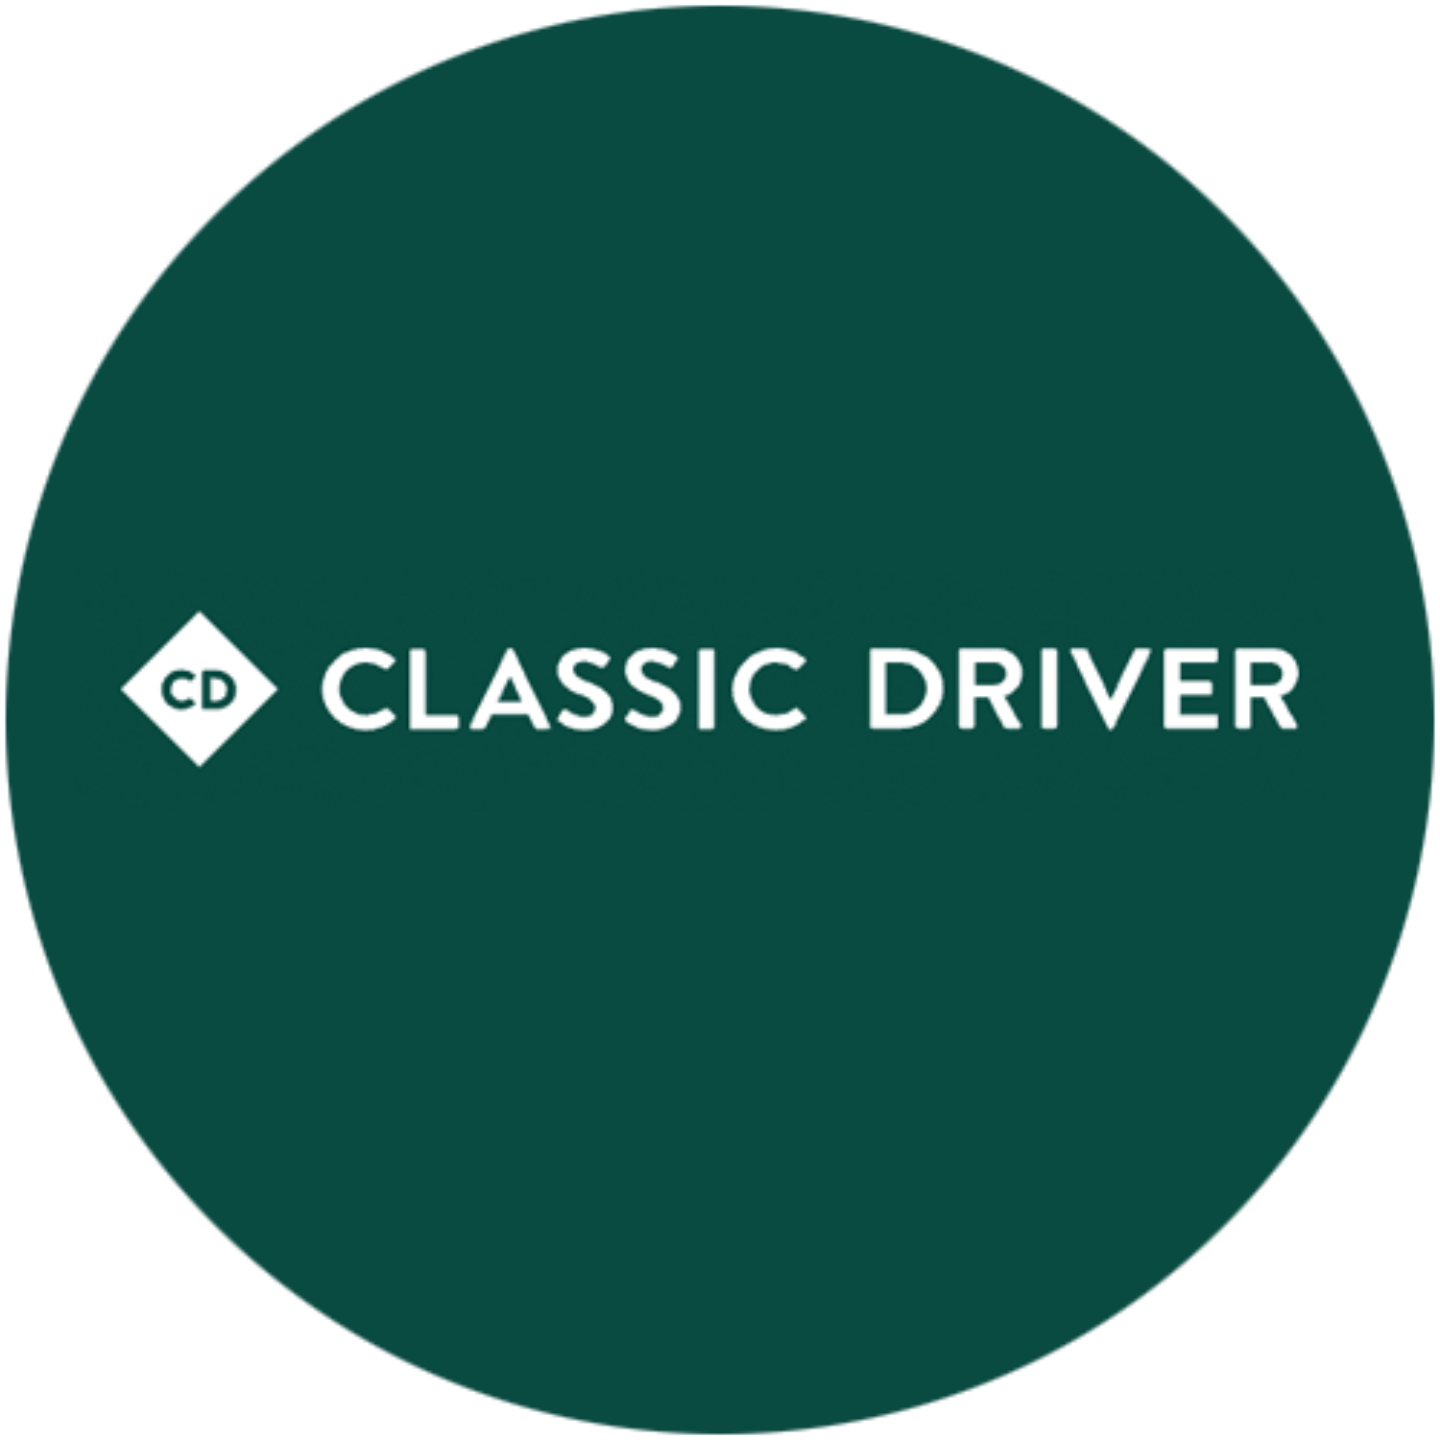 Classicdriver